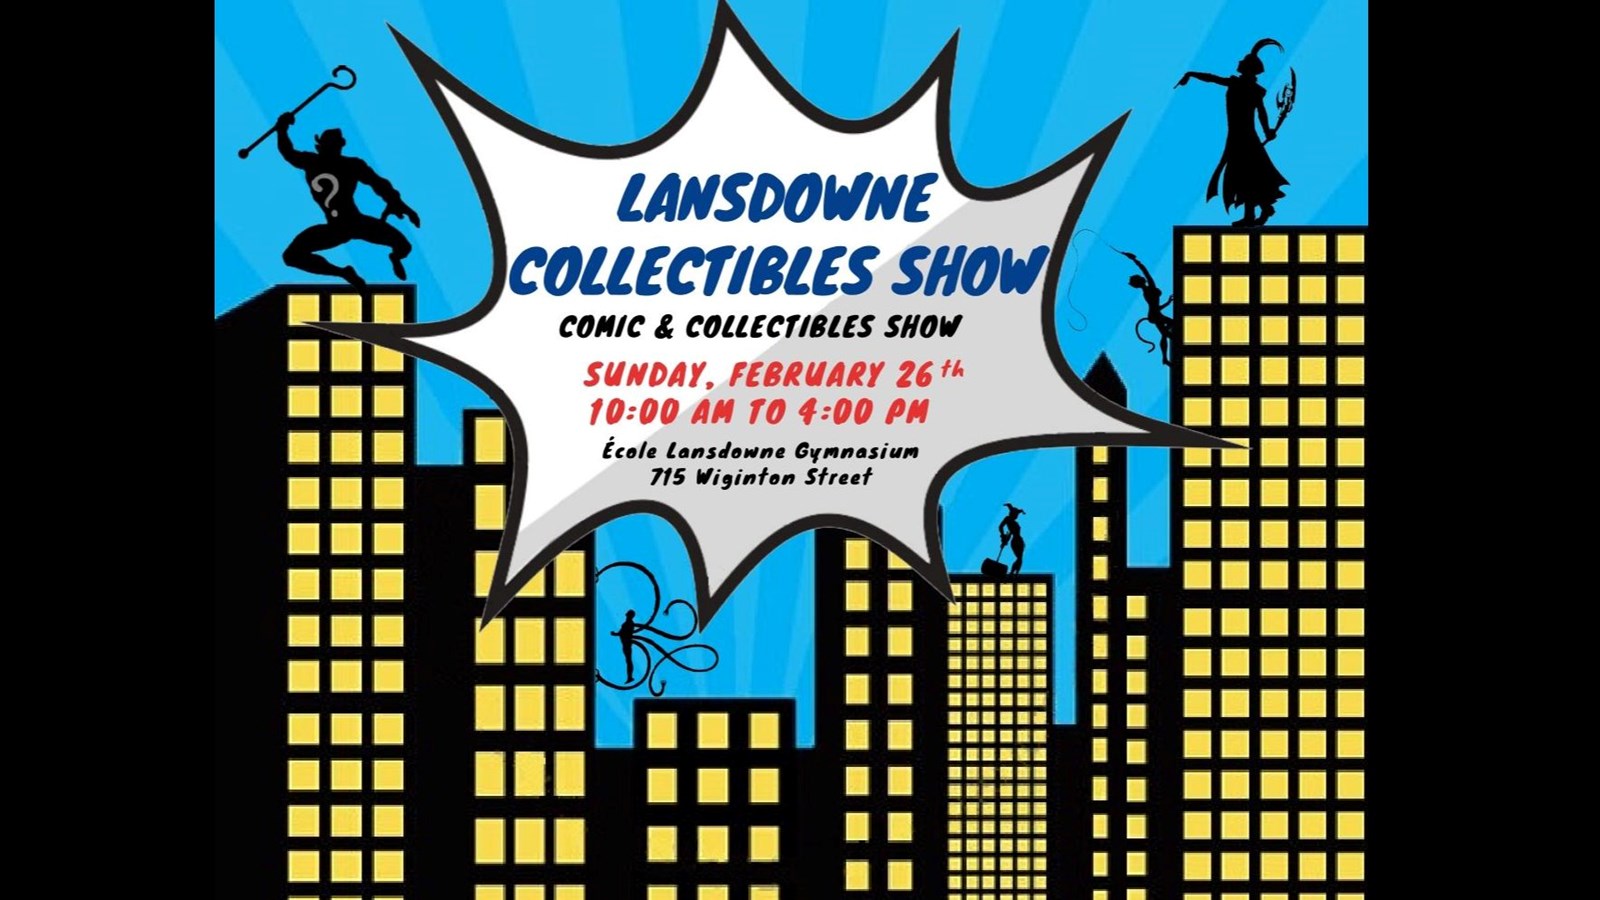 Lansdowne Collectibles and Comic Show